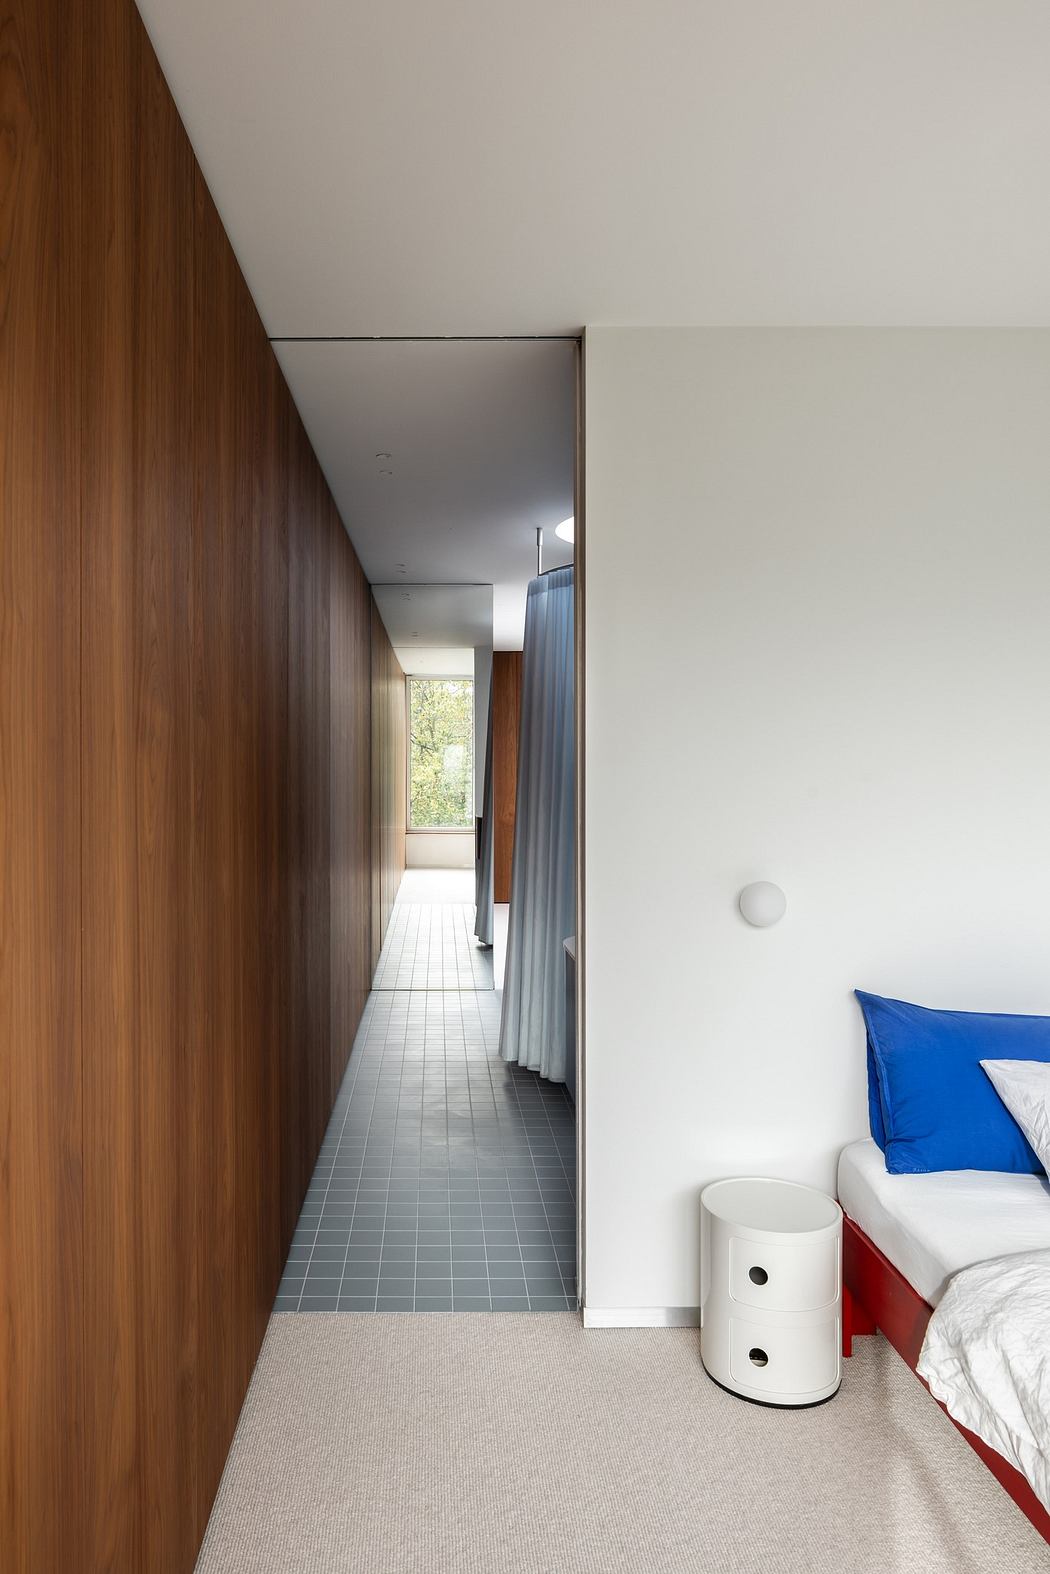 A modern bedroom with wooden paneling and a view into a tiled hallway.